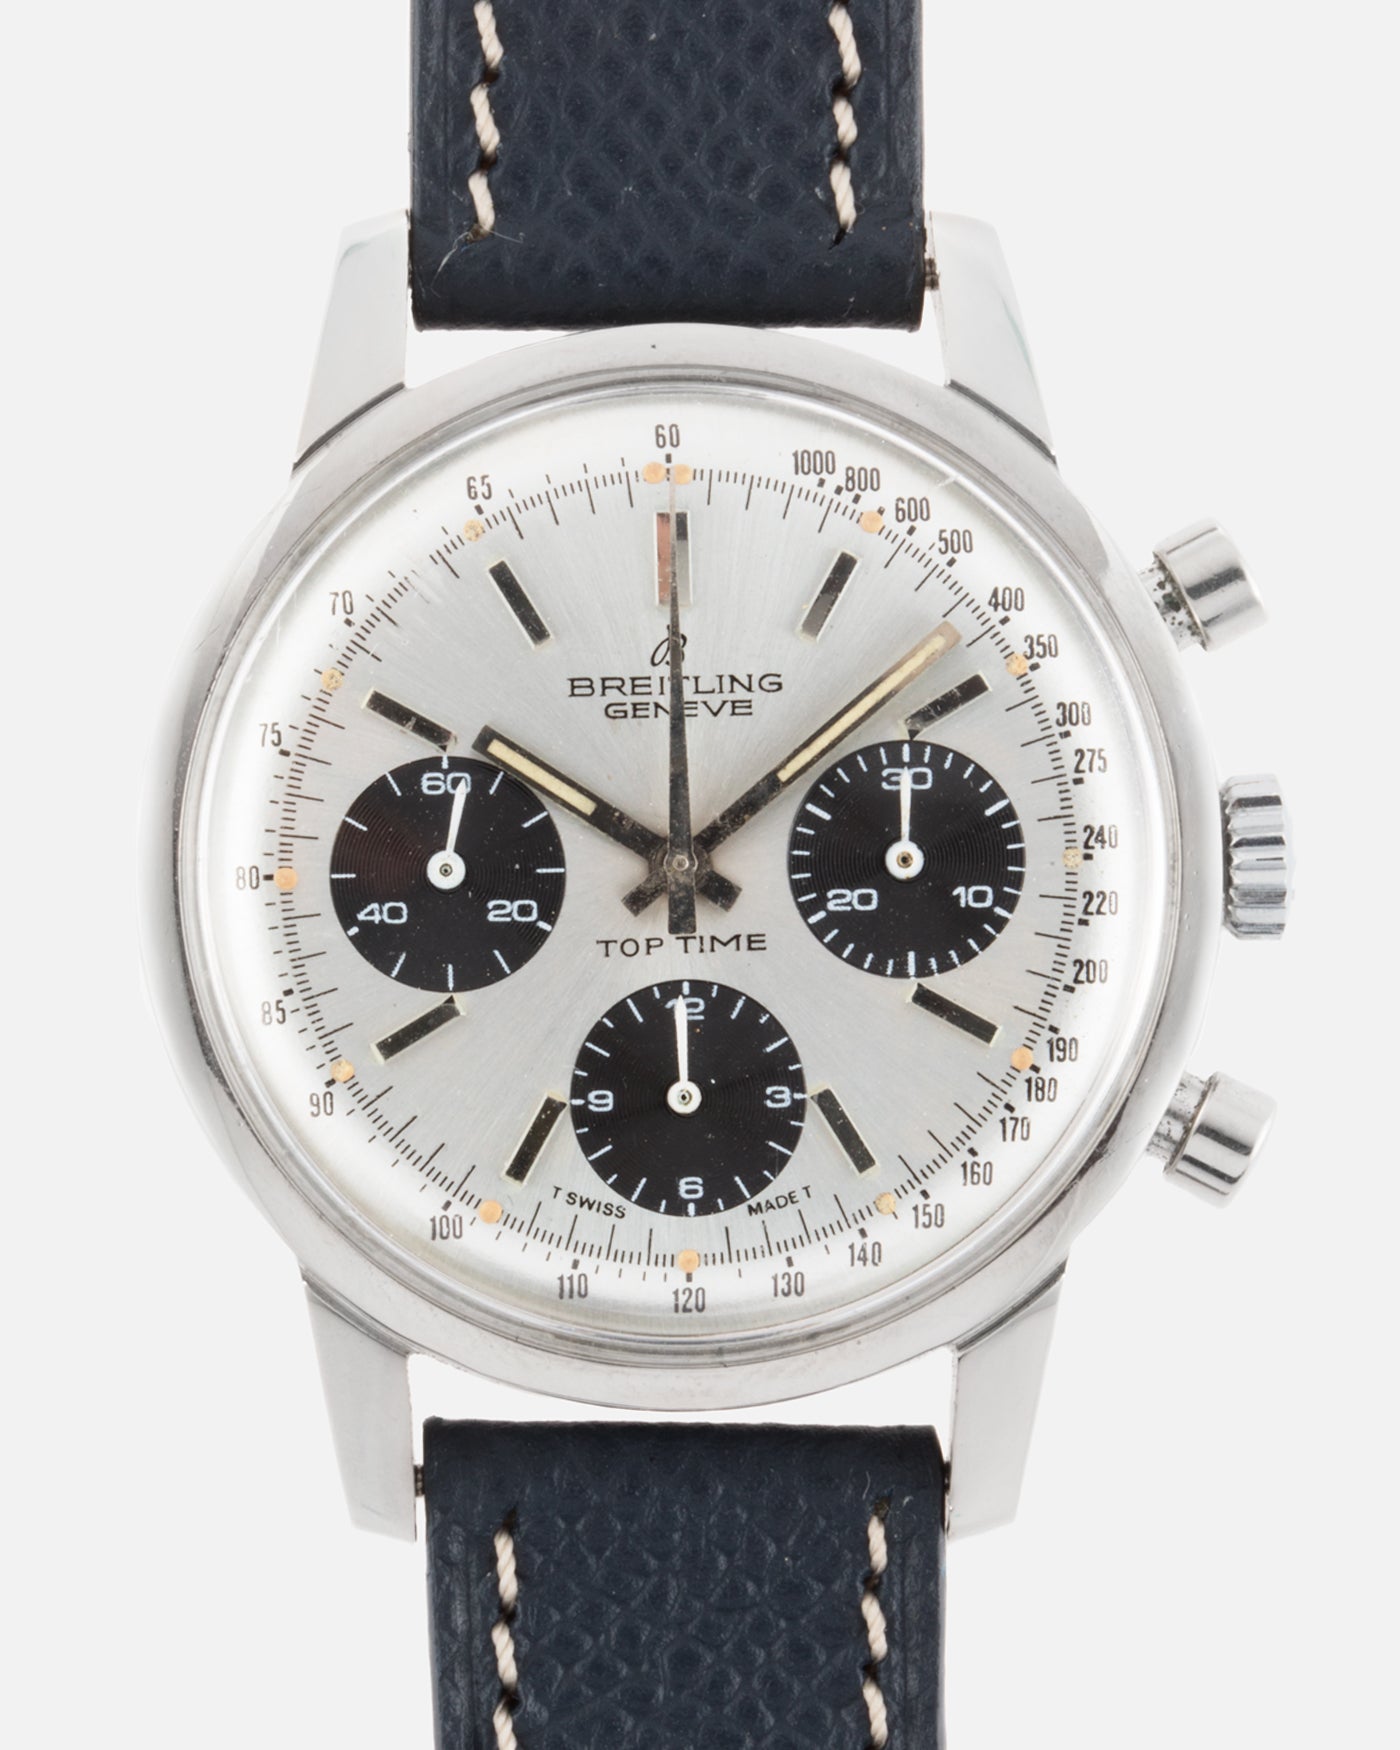 Breitling Top Time Ref. 815 Long Playing Vintage Racing Chronograph ...